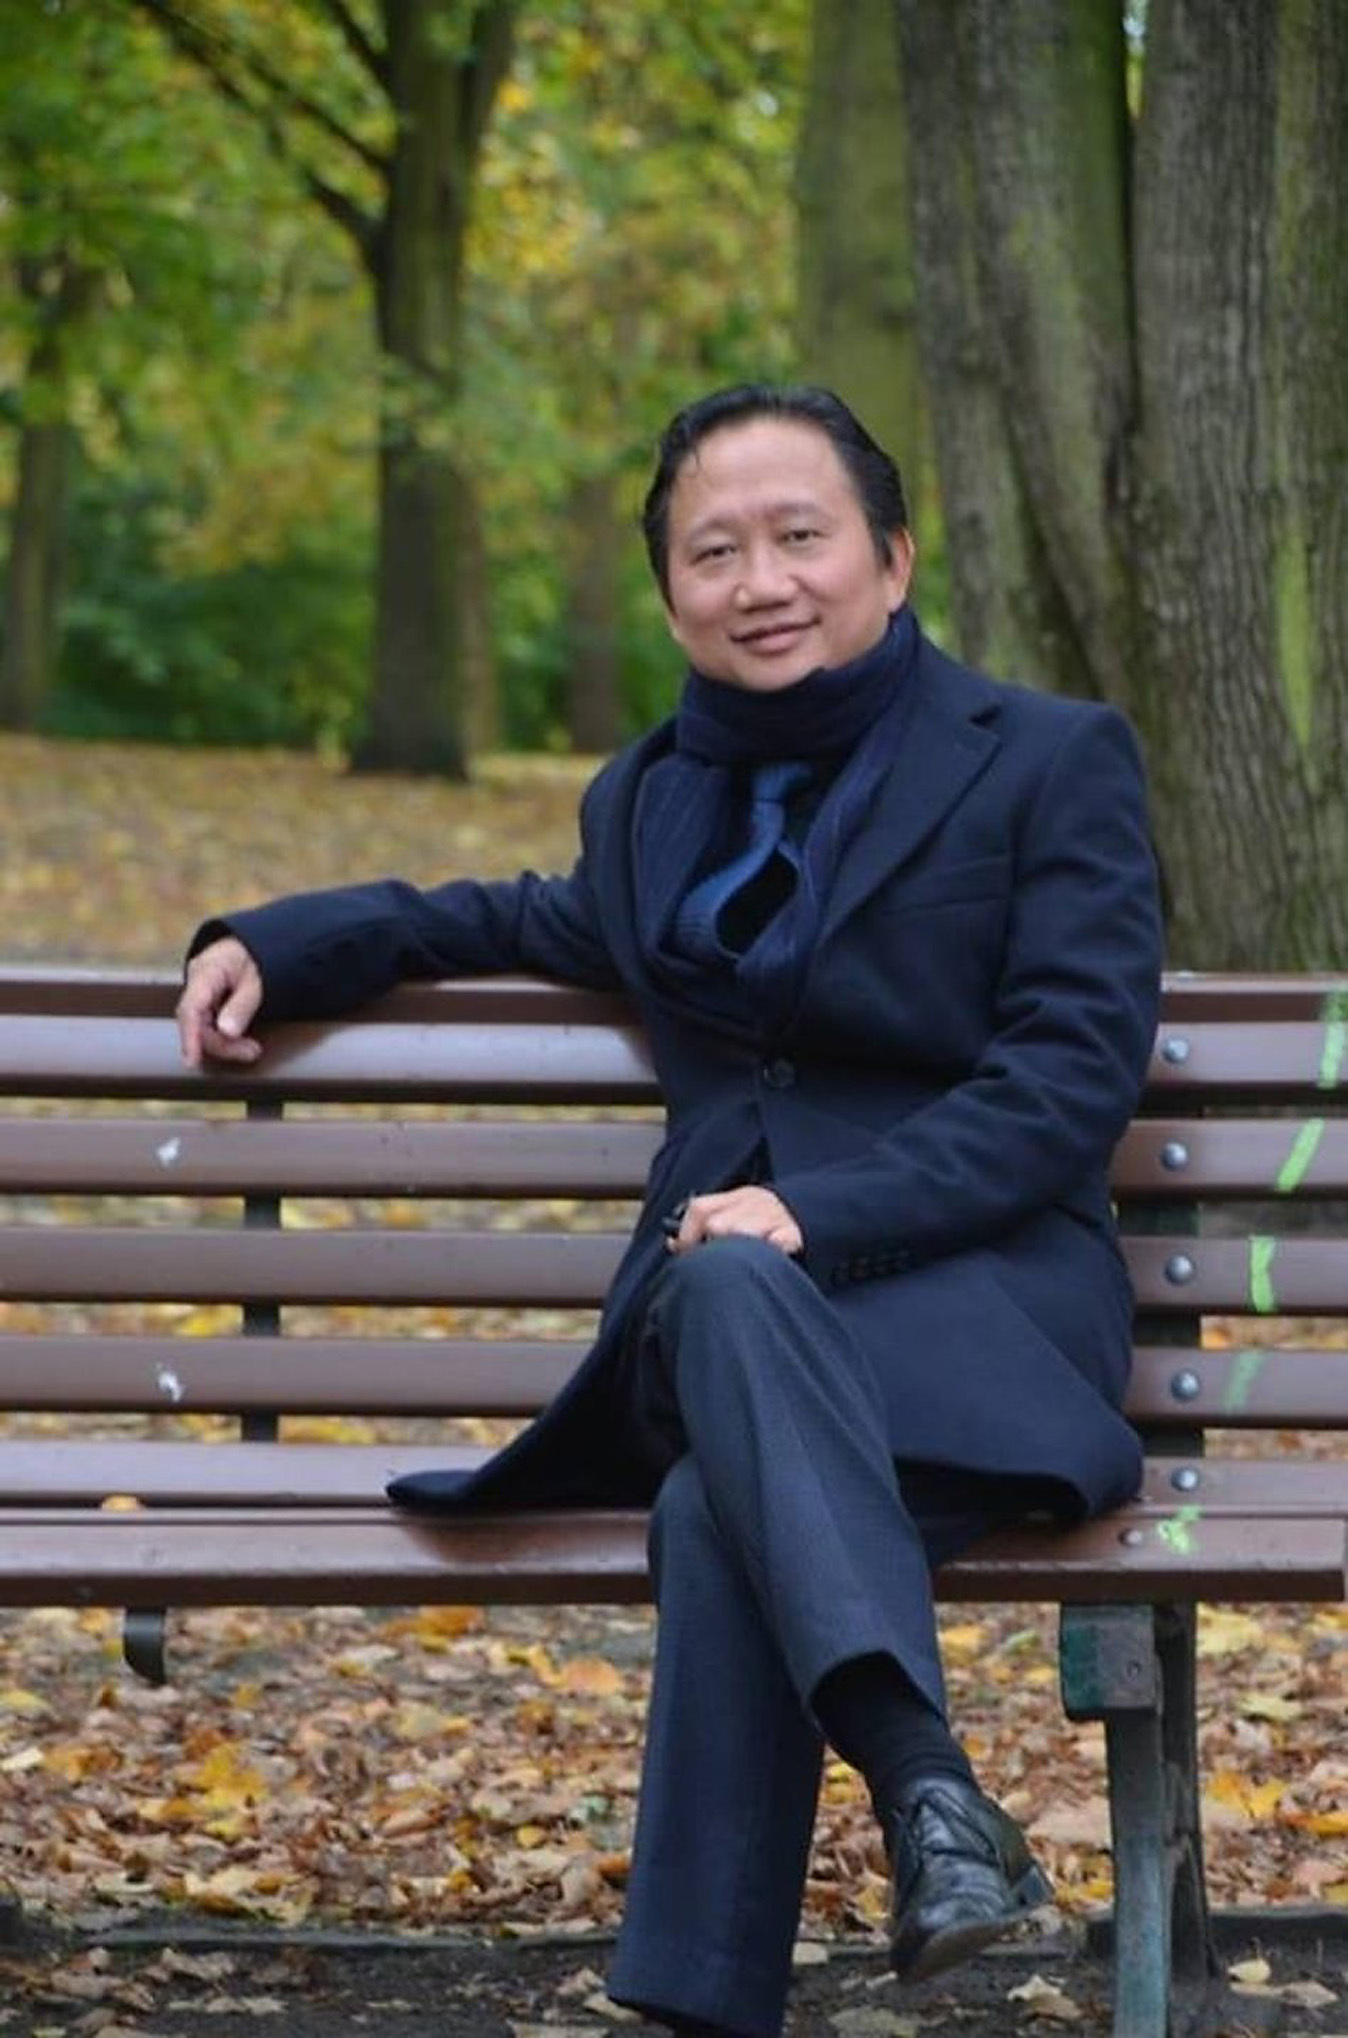 This undated picture received on August 2, 2017 shows Vietnamese national Trinh Xuan Thanh sitting on a park bench in Berlin. (STR—AFP/Getty Images)